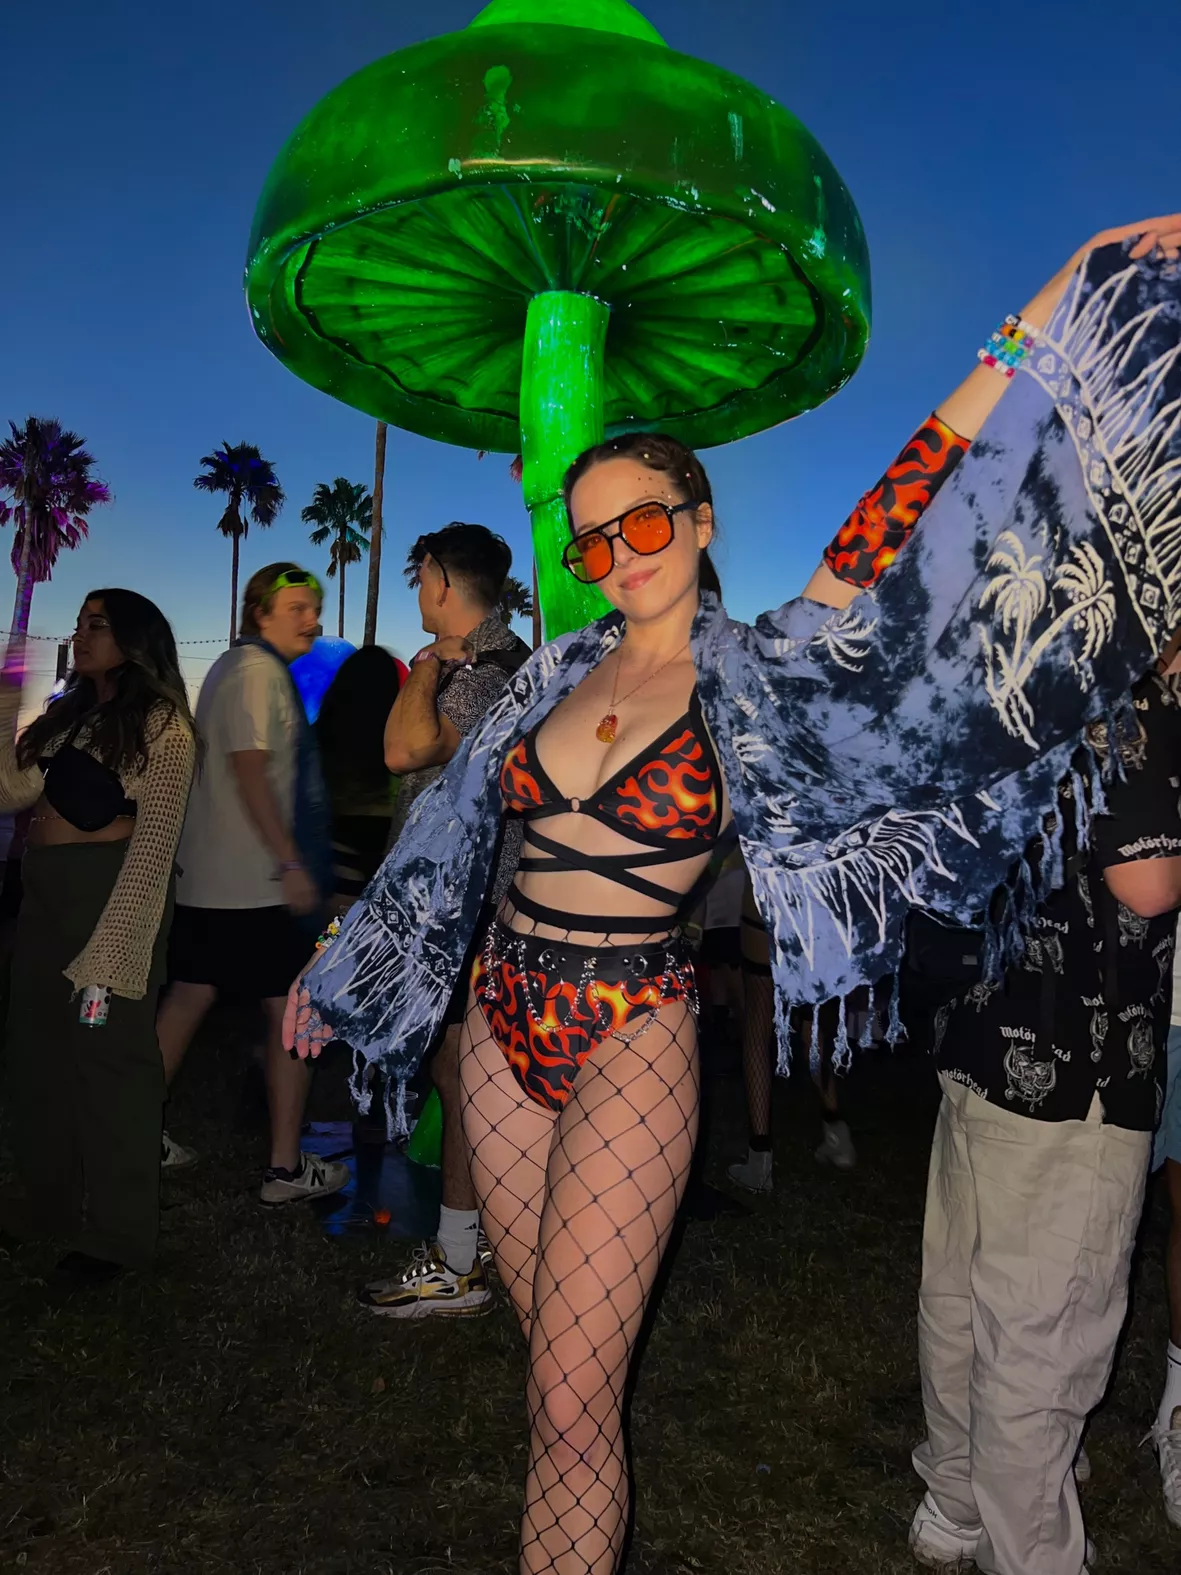 Festival Fashion: How to Dress For a Rave?